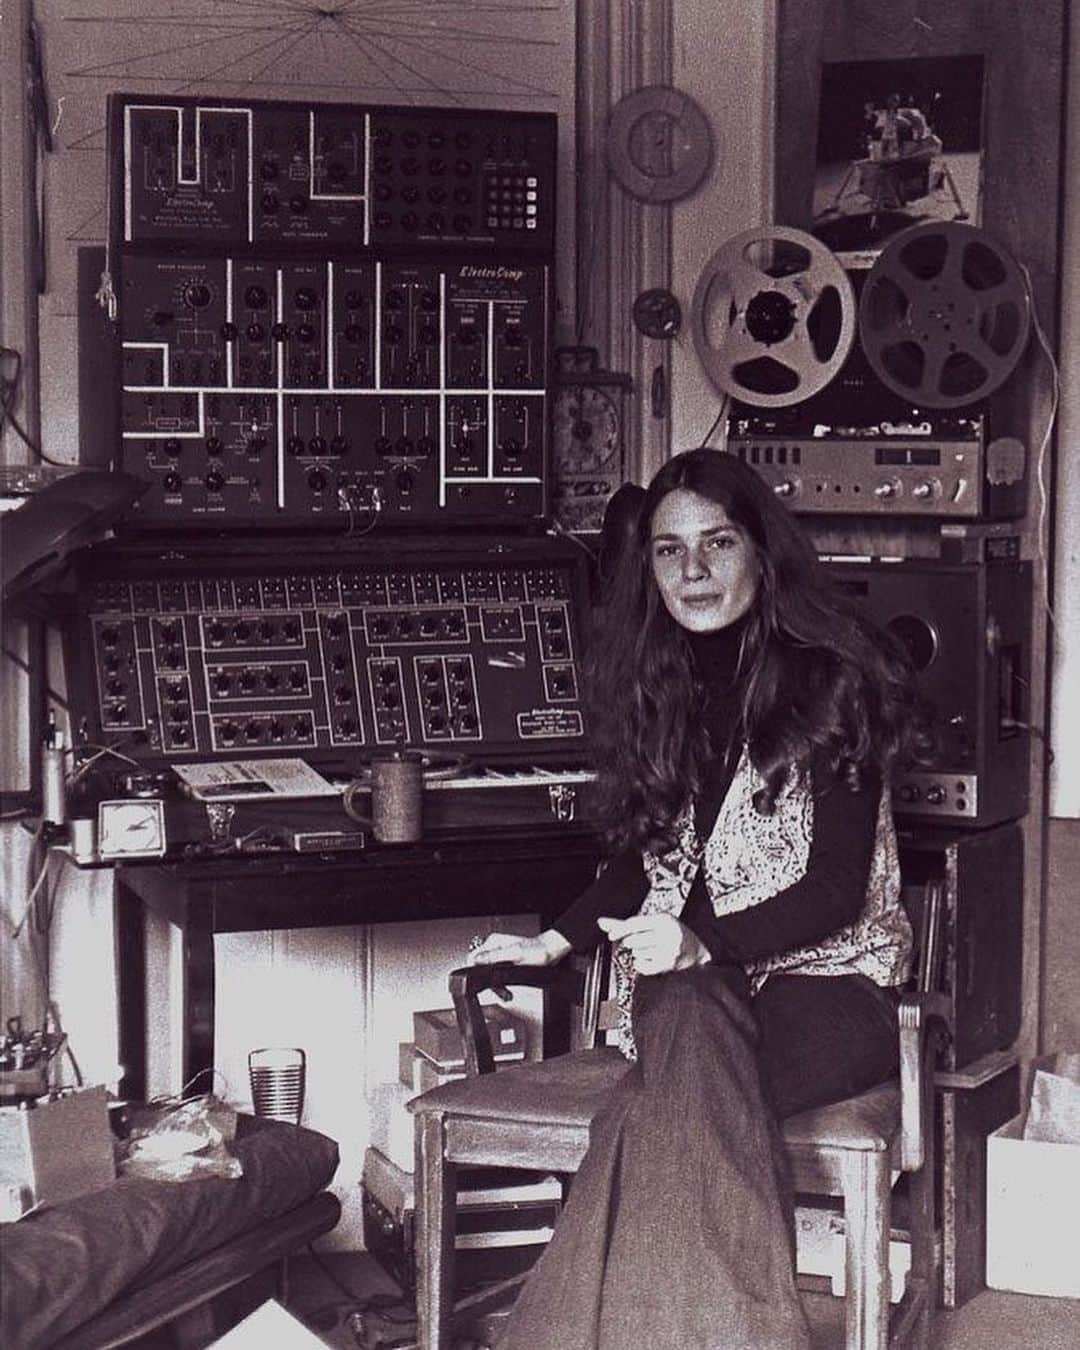 Luraのインスタグラム：「Laurie Spiegel (@laurie.spiegel) isn't just one of the pioneers in the field of electronic-music compositions, but she also came up with the widely used algorithmic musical composition software, Music Mouse. Her accomplishments are too many to mention here, but one of her most acclaimed works is her first LP, The Expanding Universe, which was released in 1980 and remains a synthesizer classic to this day. #lulalistens」